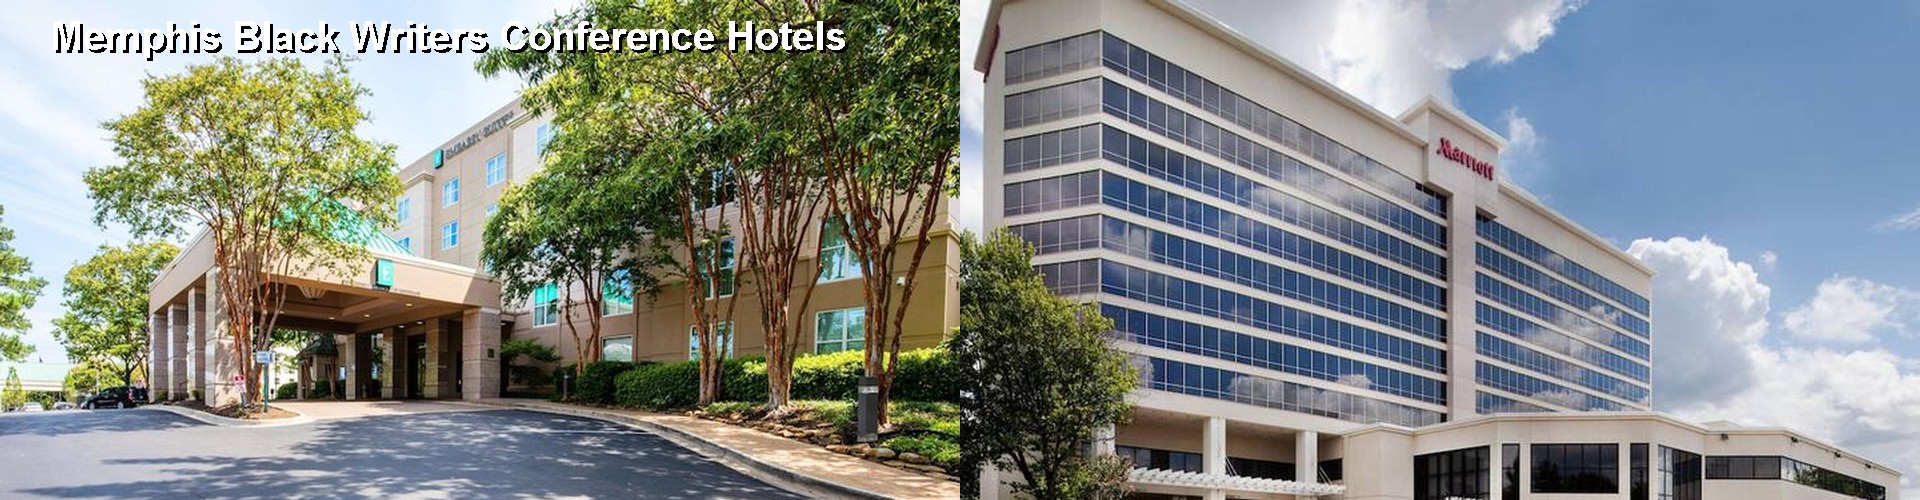 2 Best Hotels near Memphis Black Writers Conference